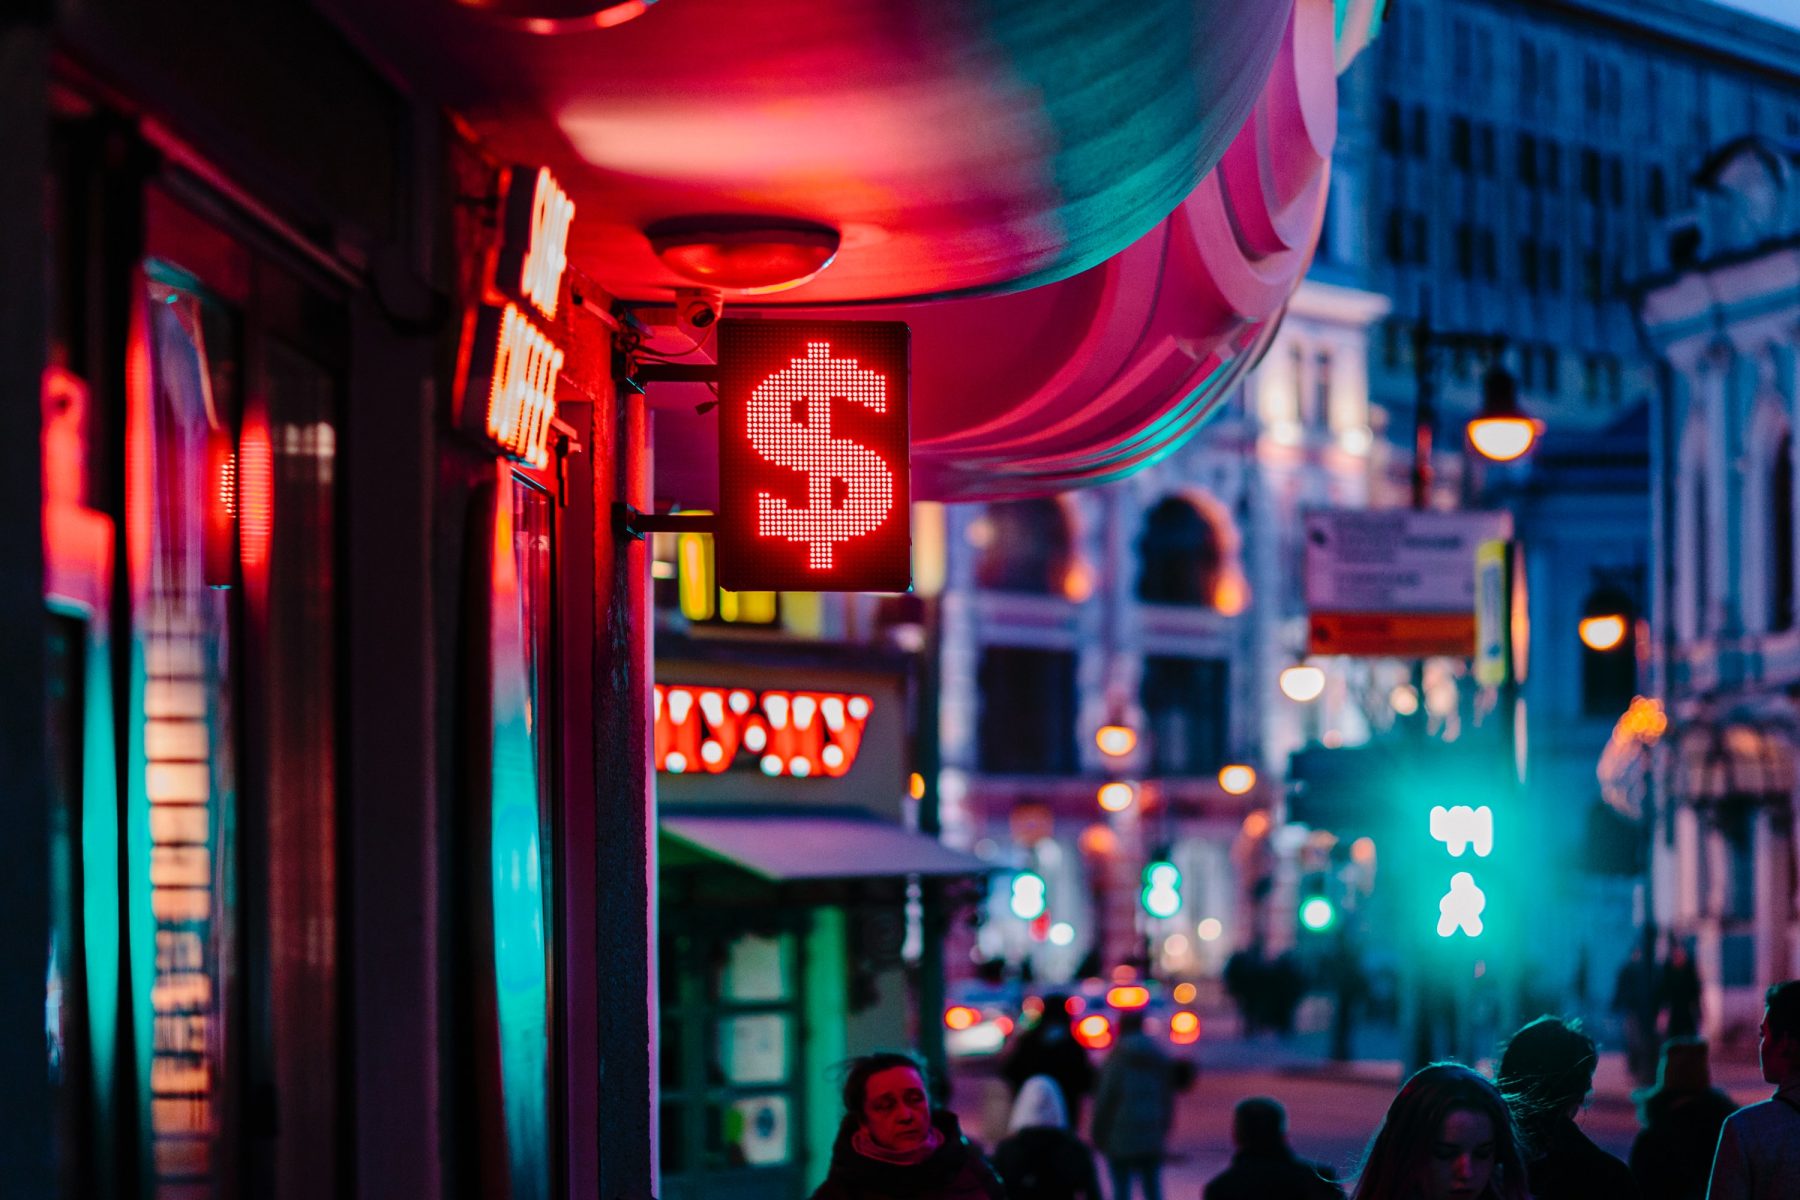 Stock image of street with neon dollar pricing sign